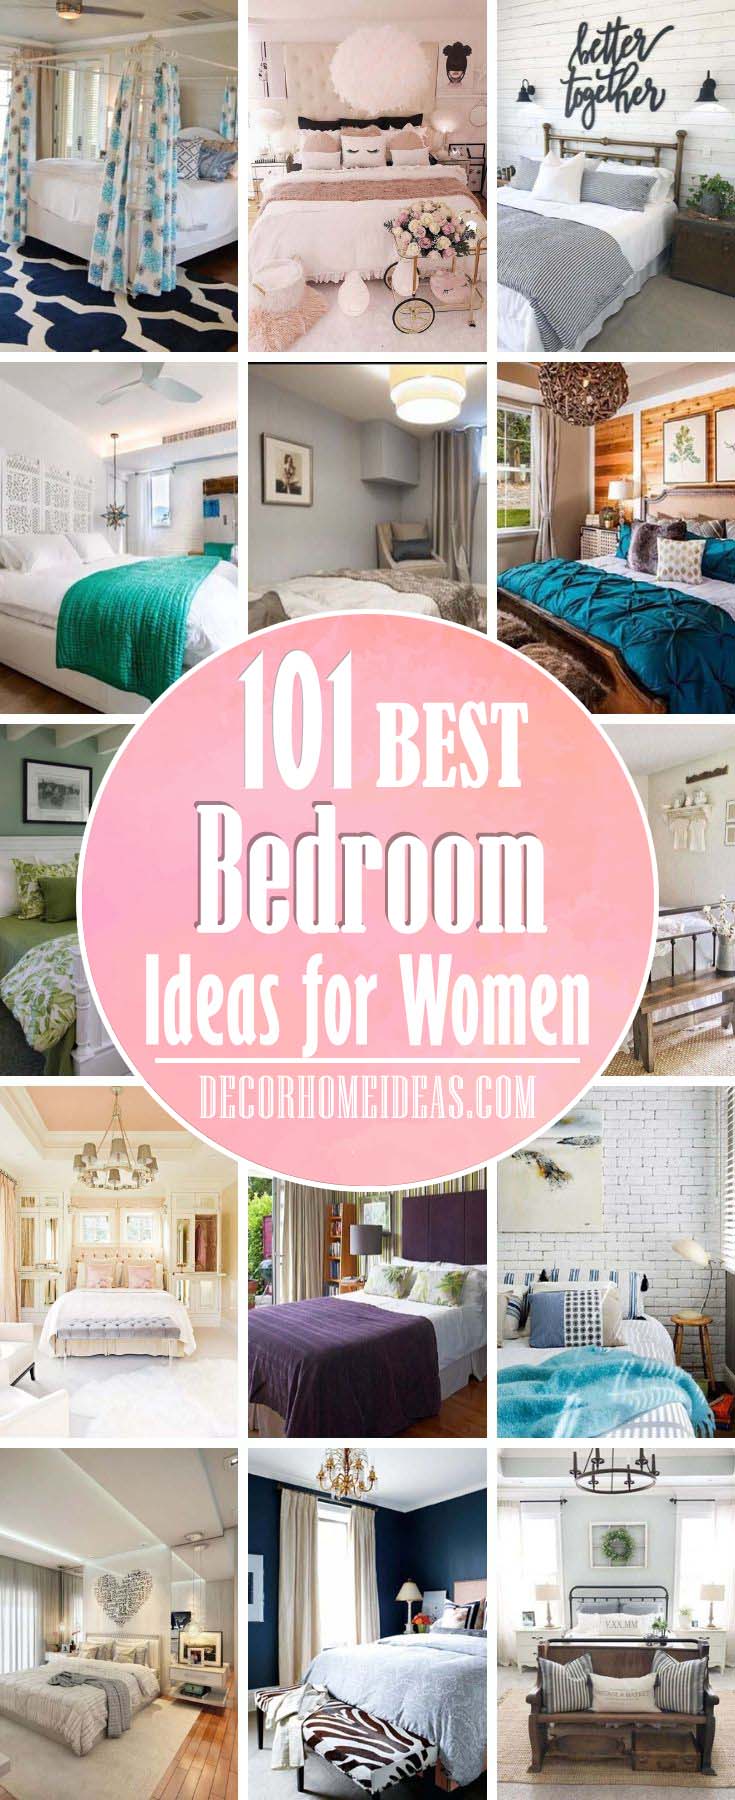 20 Best Bedroom Ideas For Women That Are Simply Adorable   Decor ...